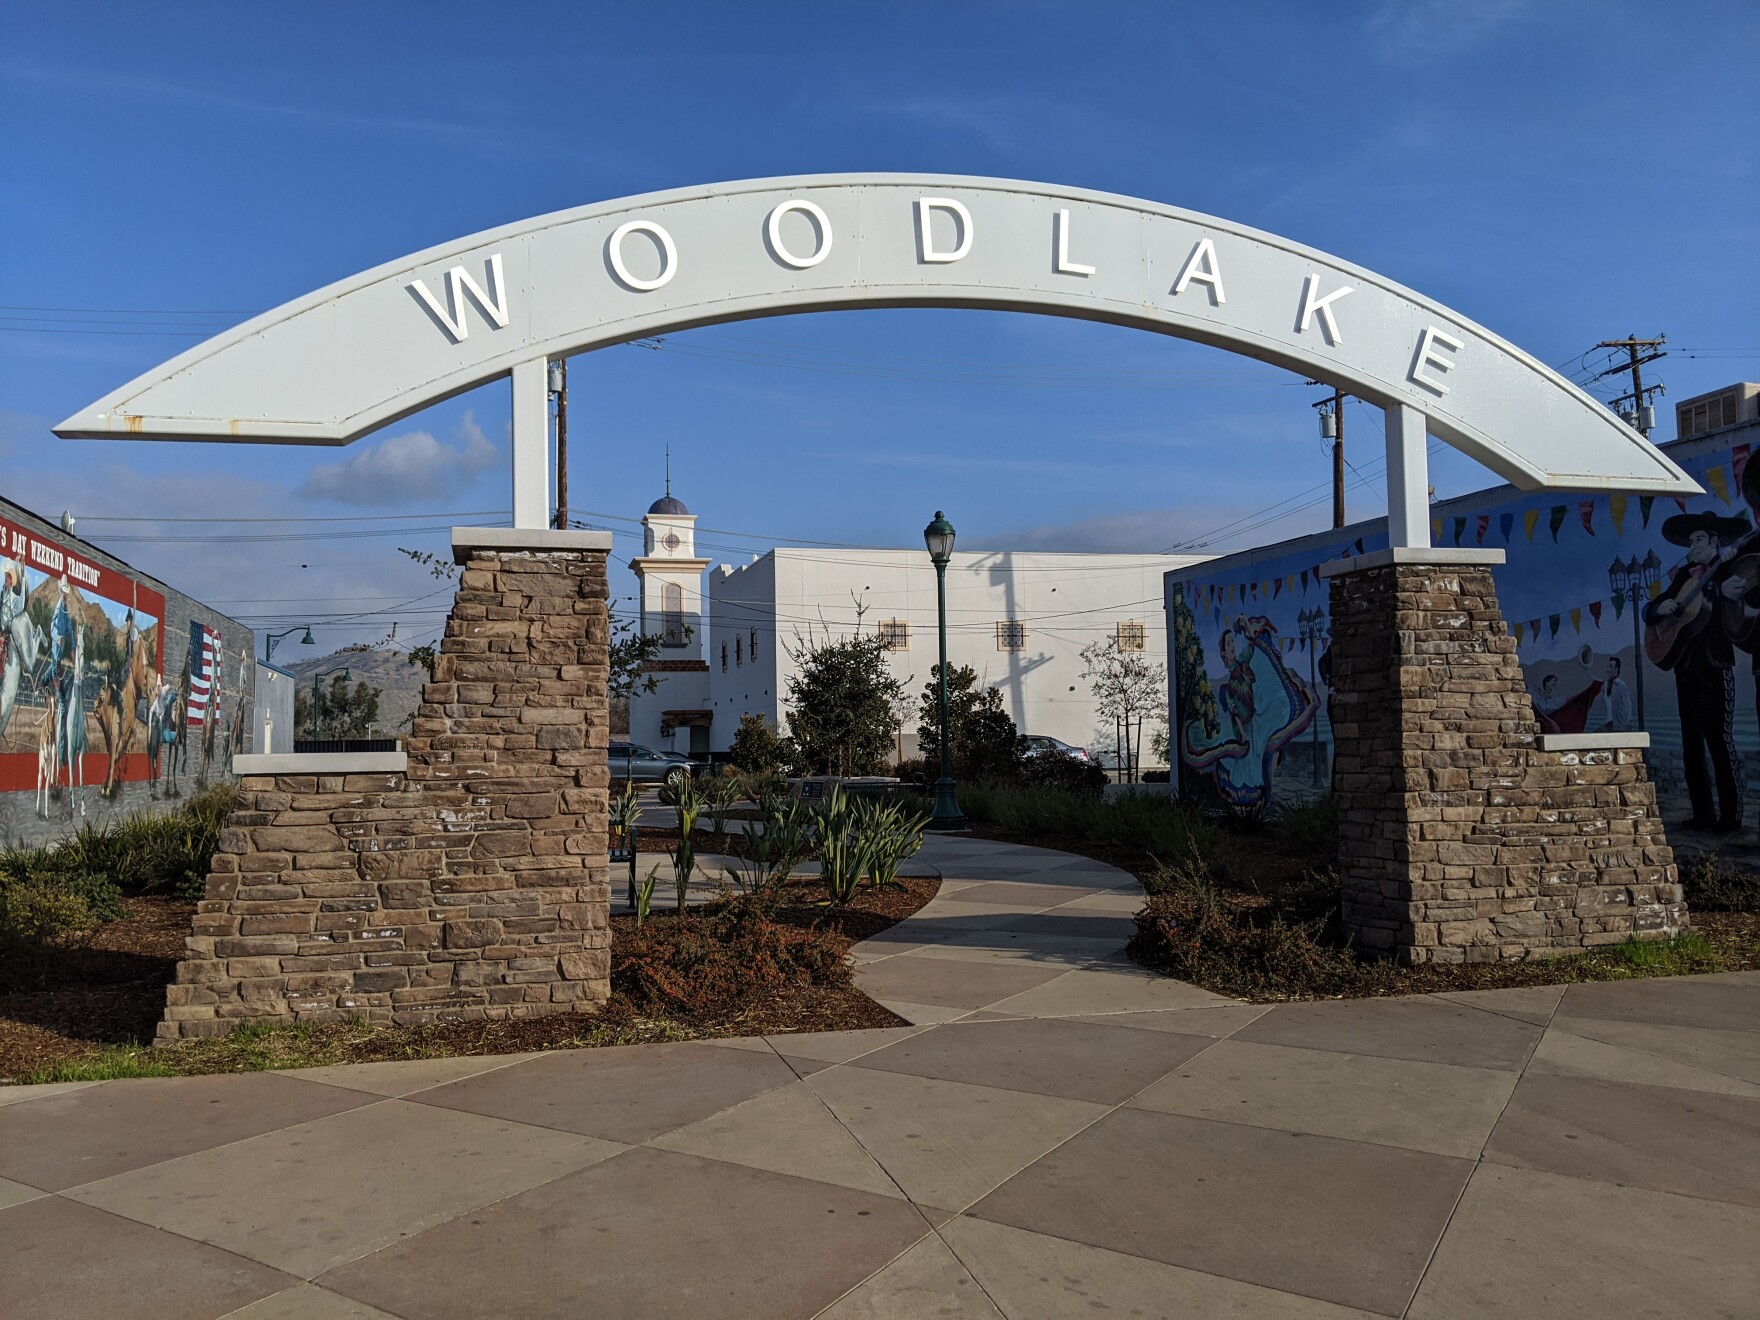 an arching town sign that says woodlake